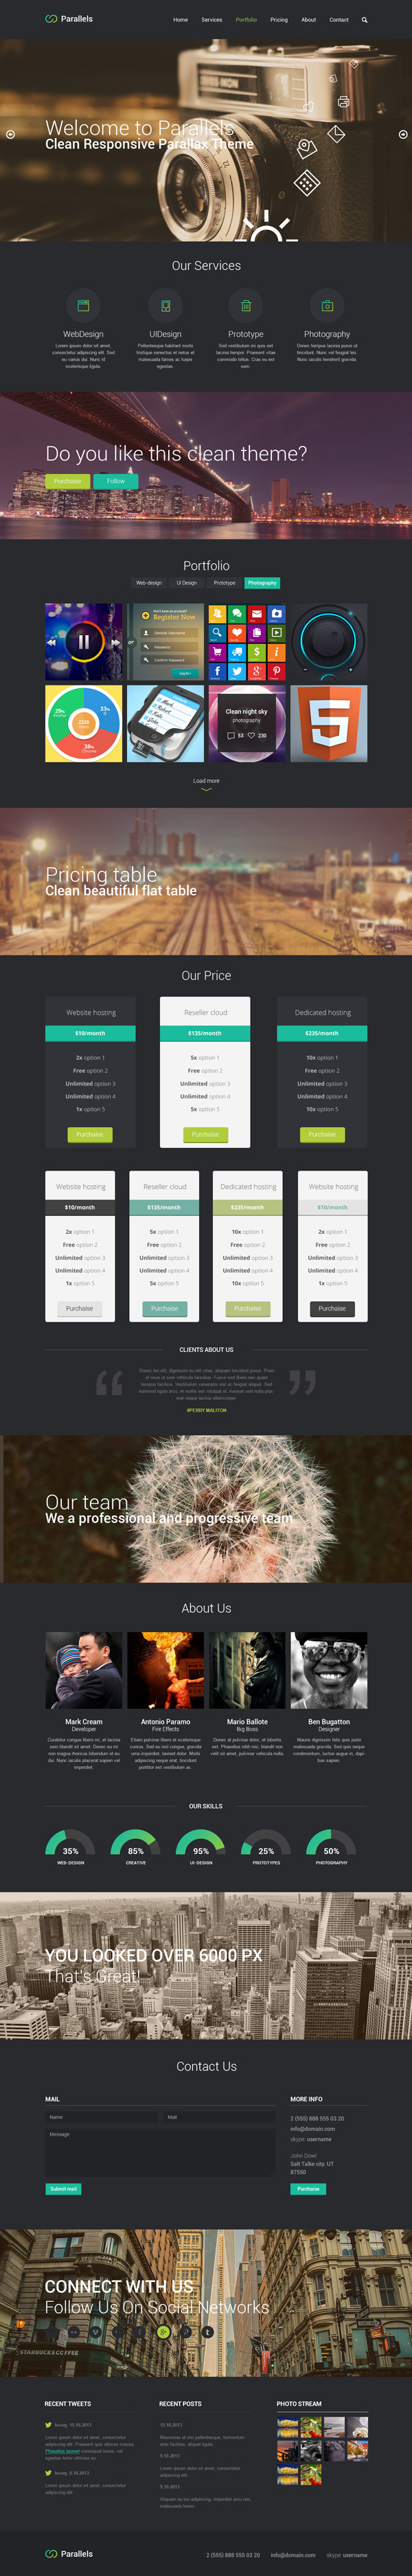 Free Responsive Template PSD